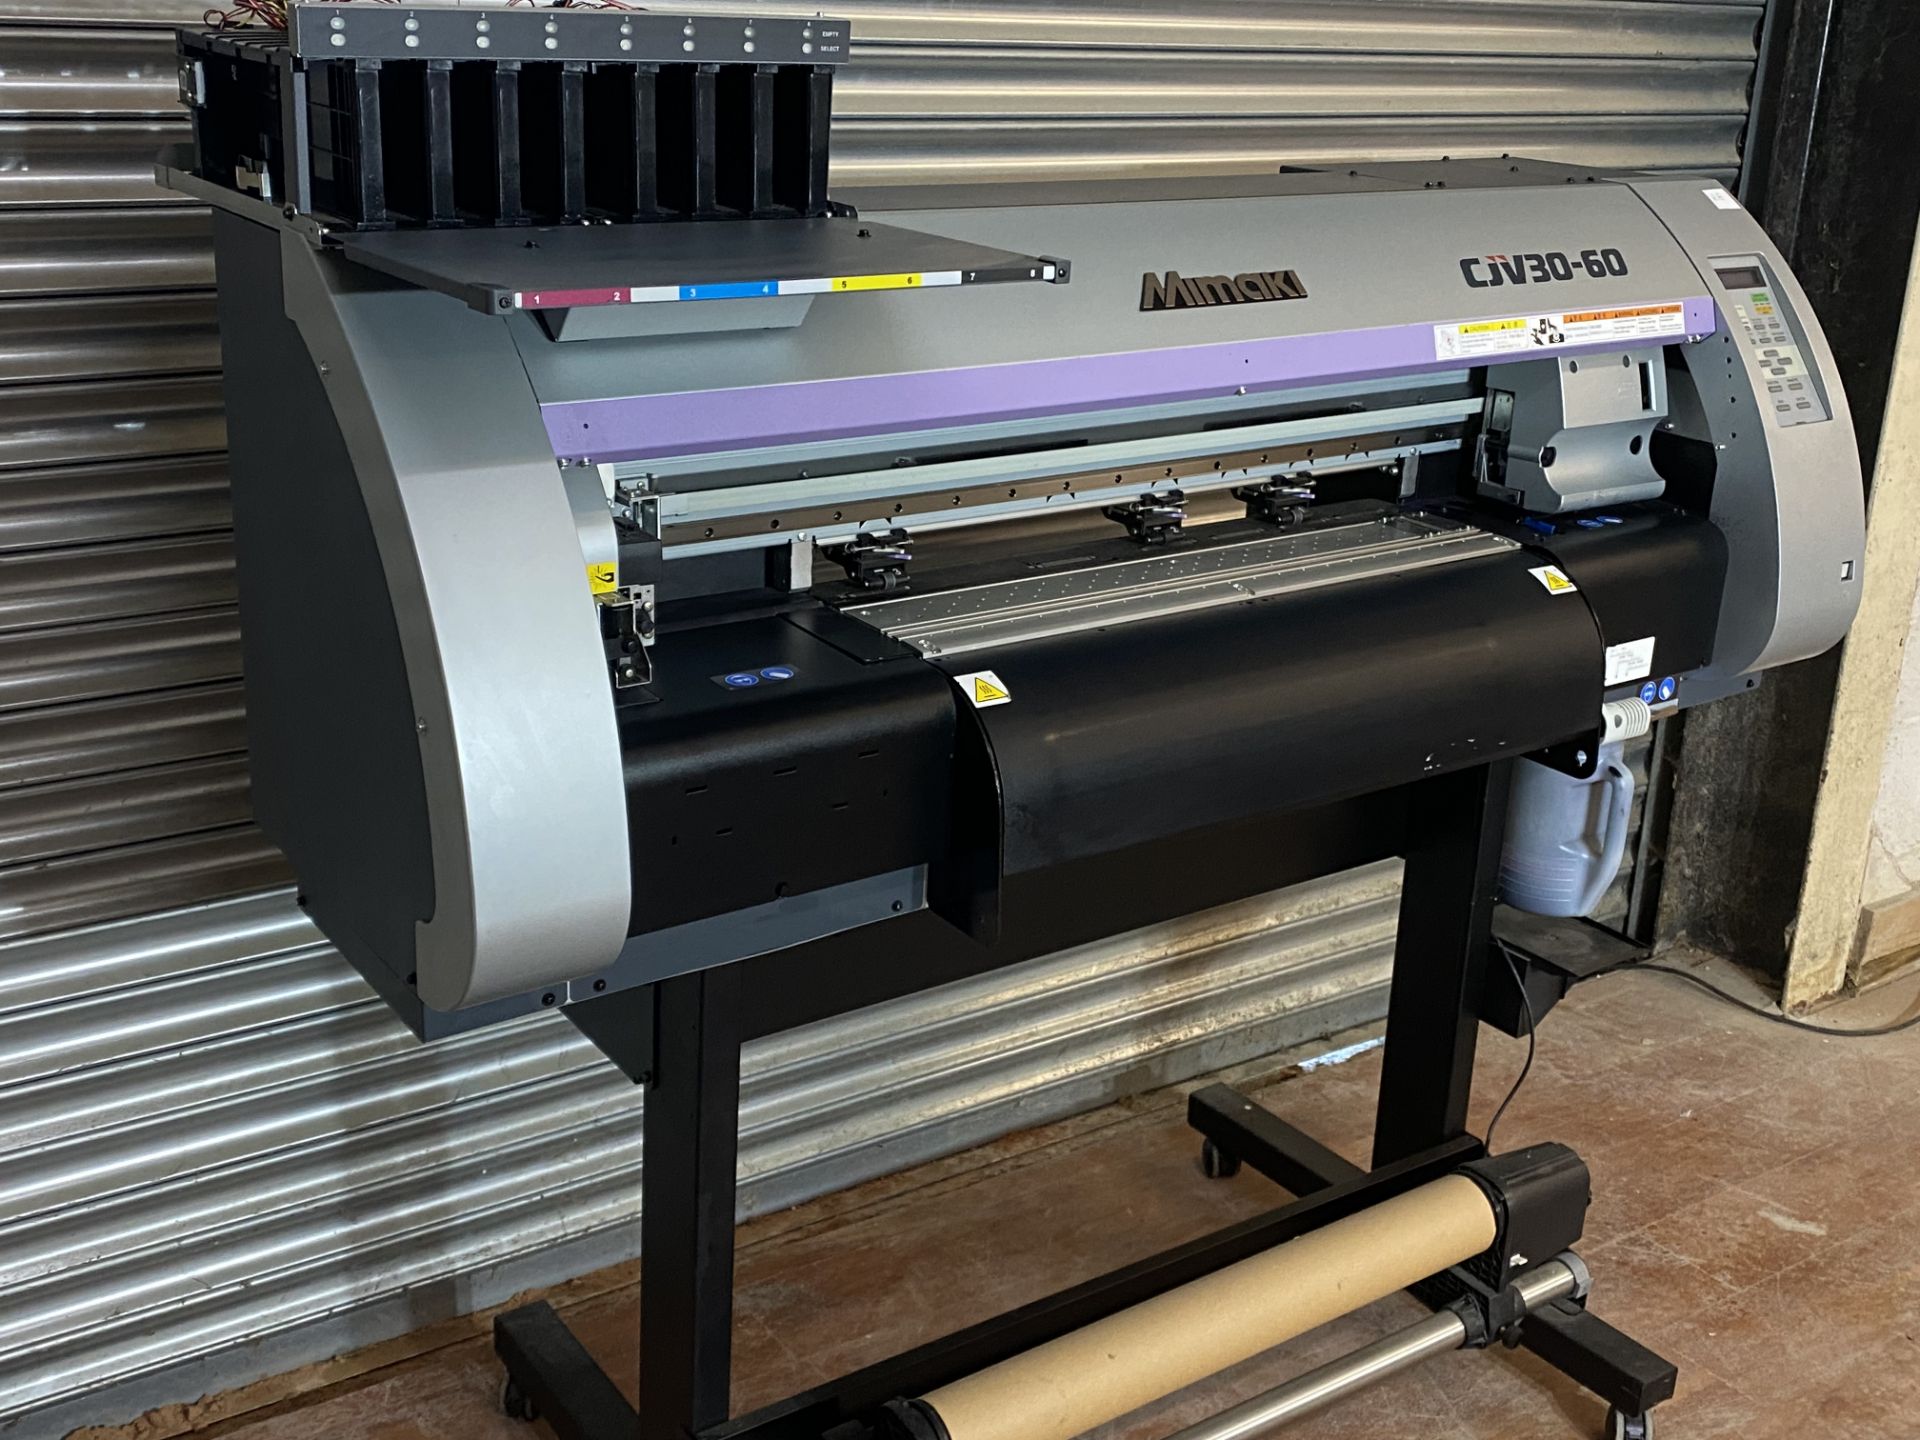 (R8) MIMAKI CJV 30-60 ECO SOLVENT PRINT AND CUT LARGE FORMAT PRINTER - Image 3 of 3